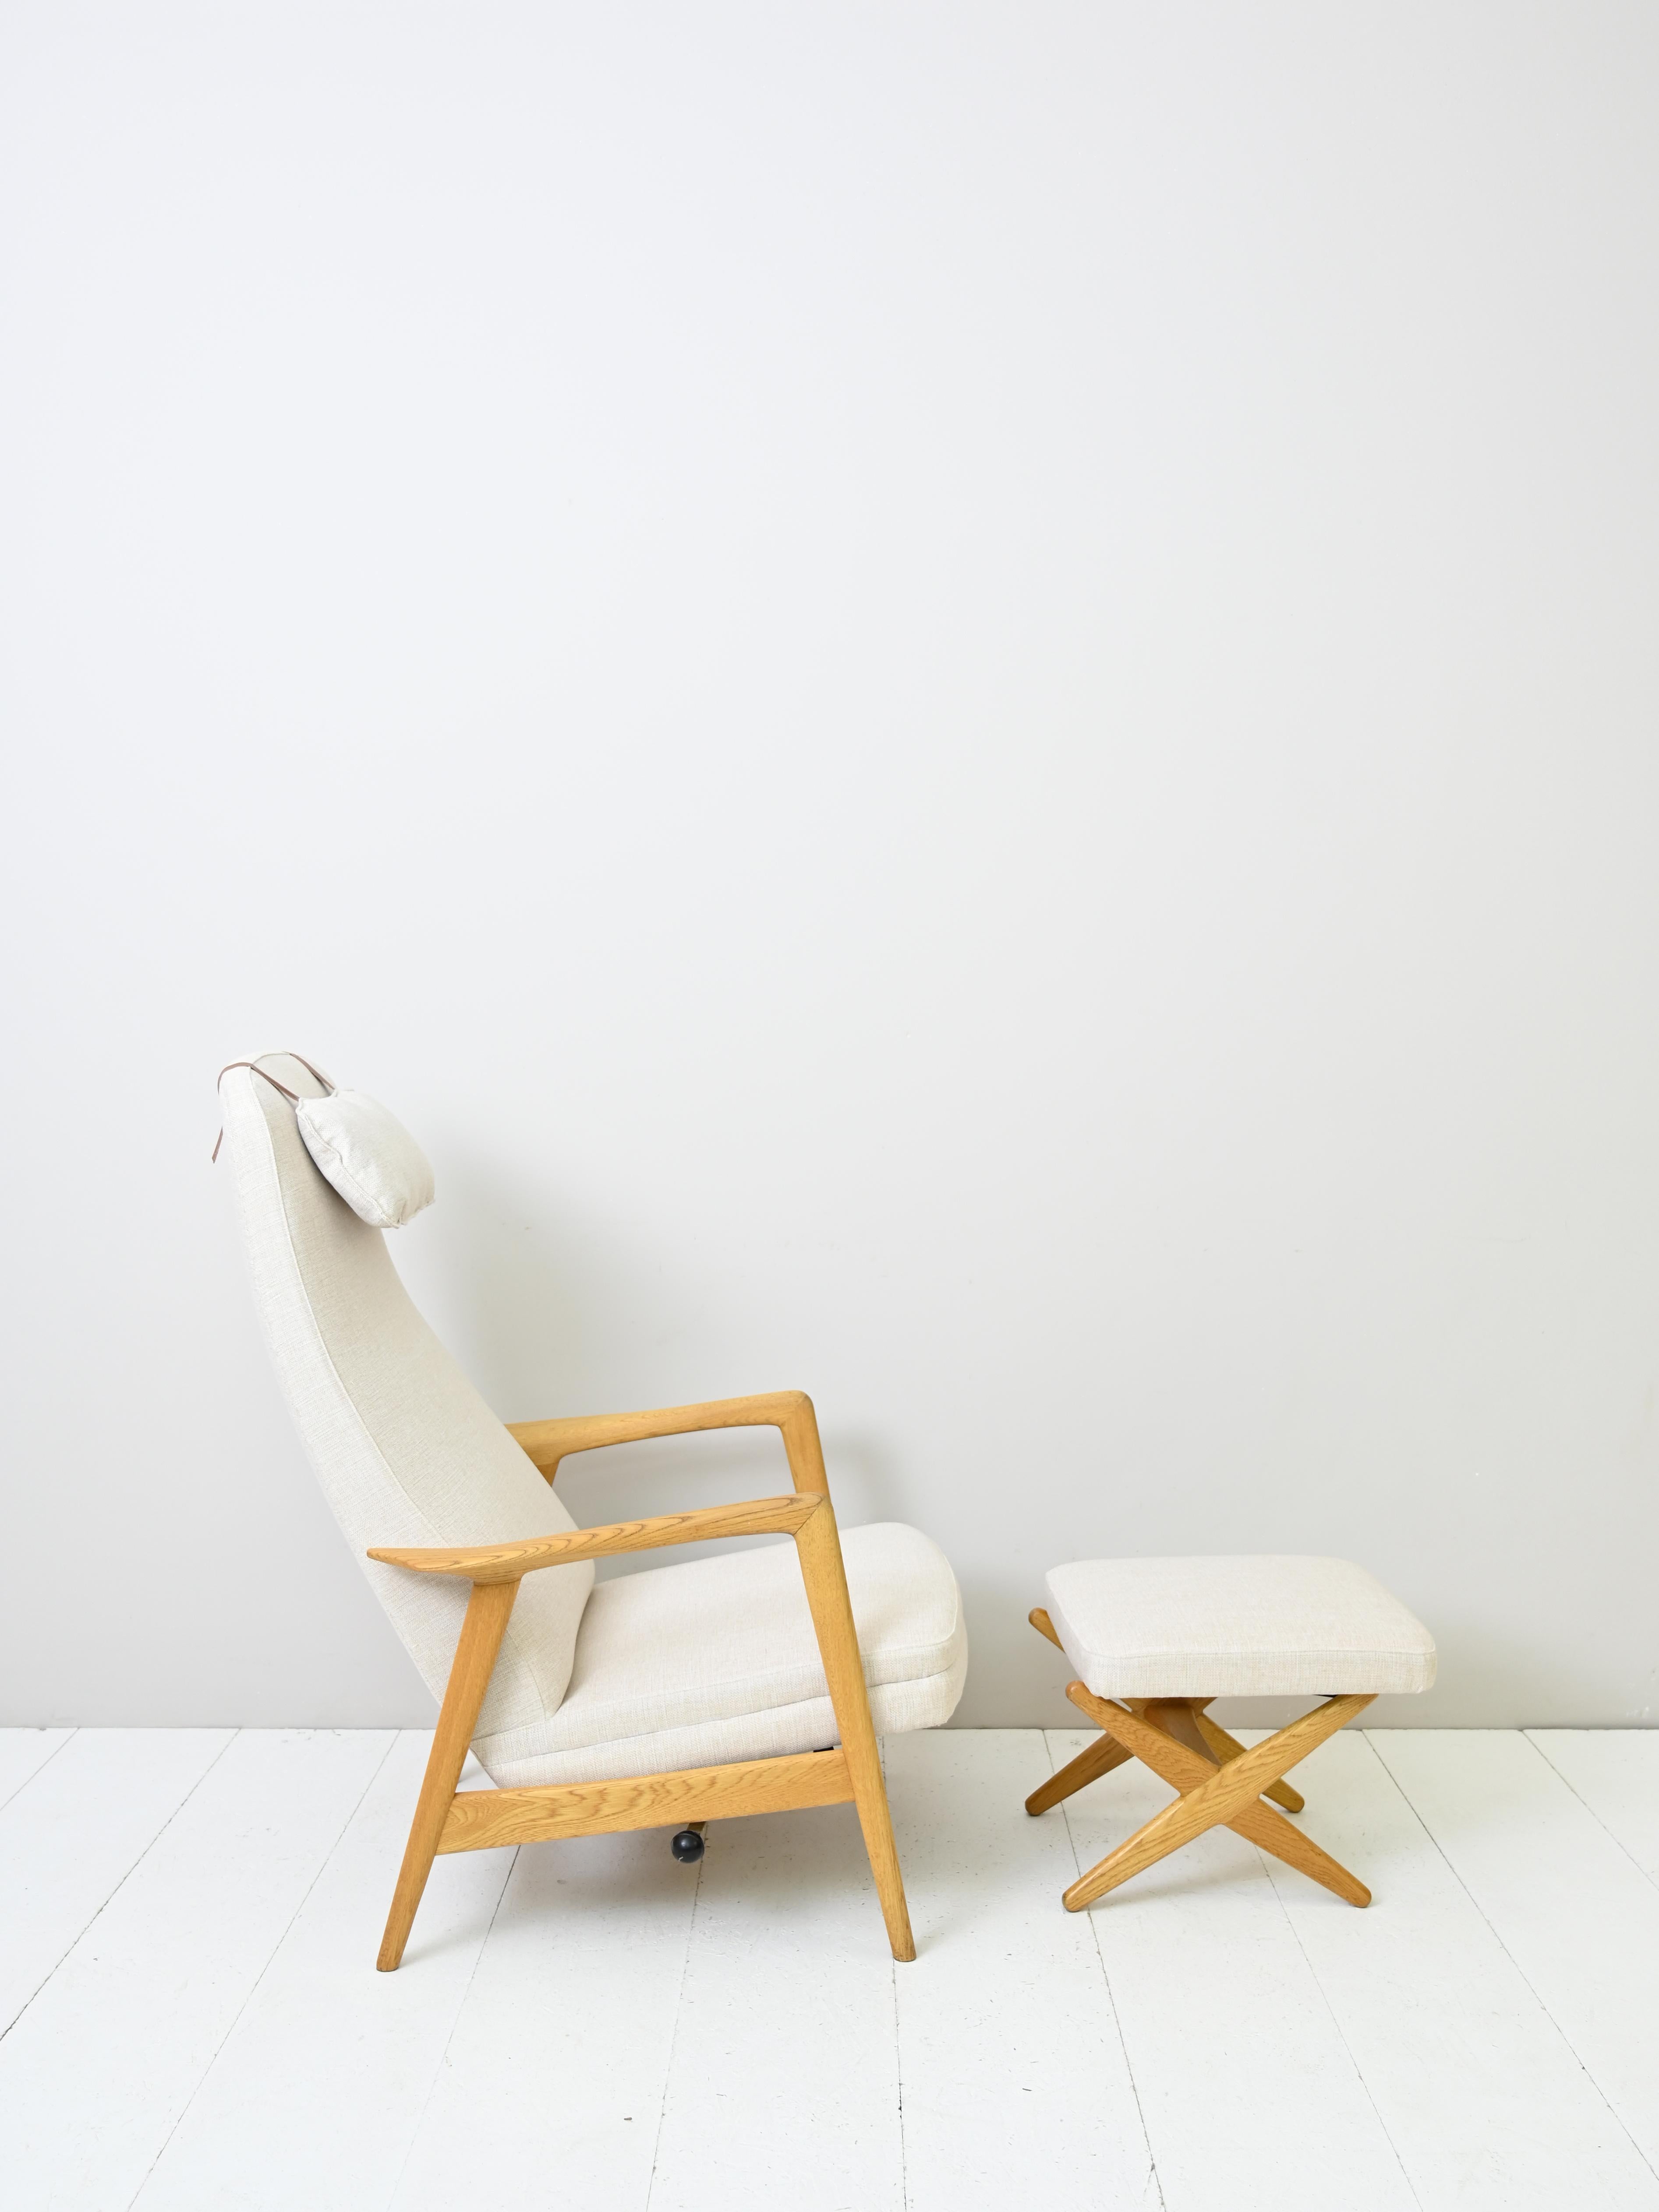 High-backed armchair designed by Alf Svensson and produced by the DUX company in the 1950s.

The attractively designed chair has a solid oak frame while the seat has been restored by replacing the upholstery and fabric. 

Using the side lever,